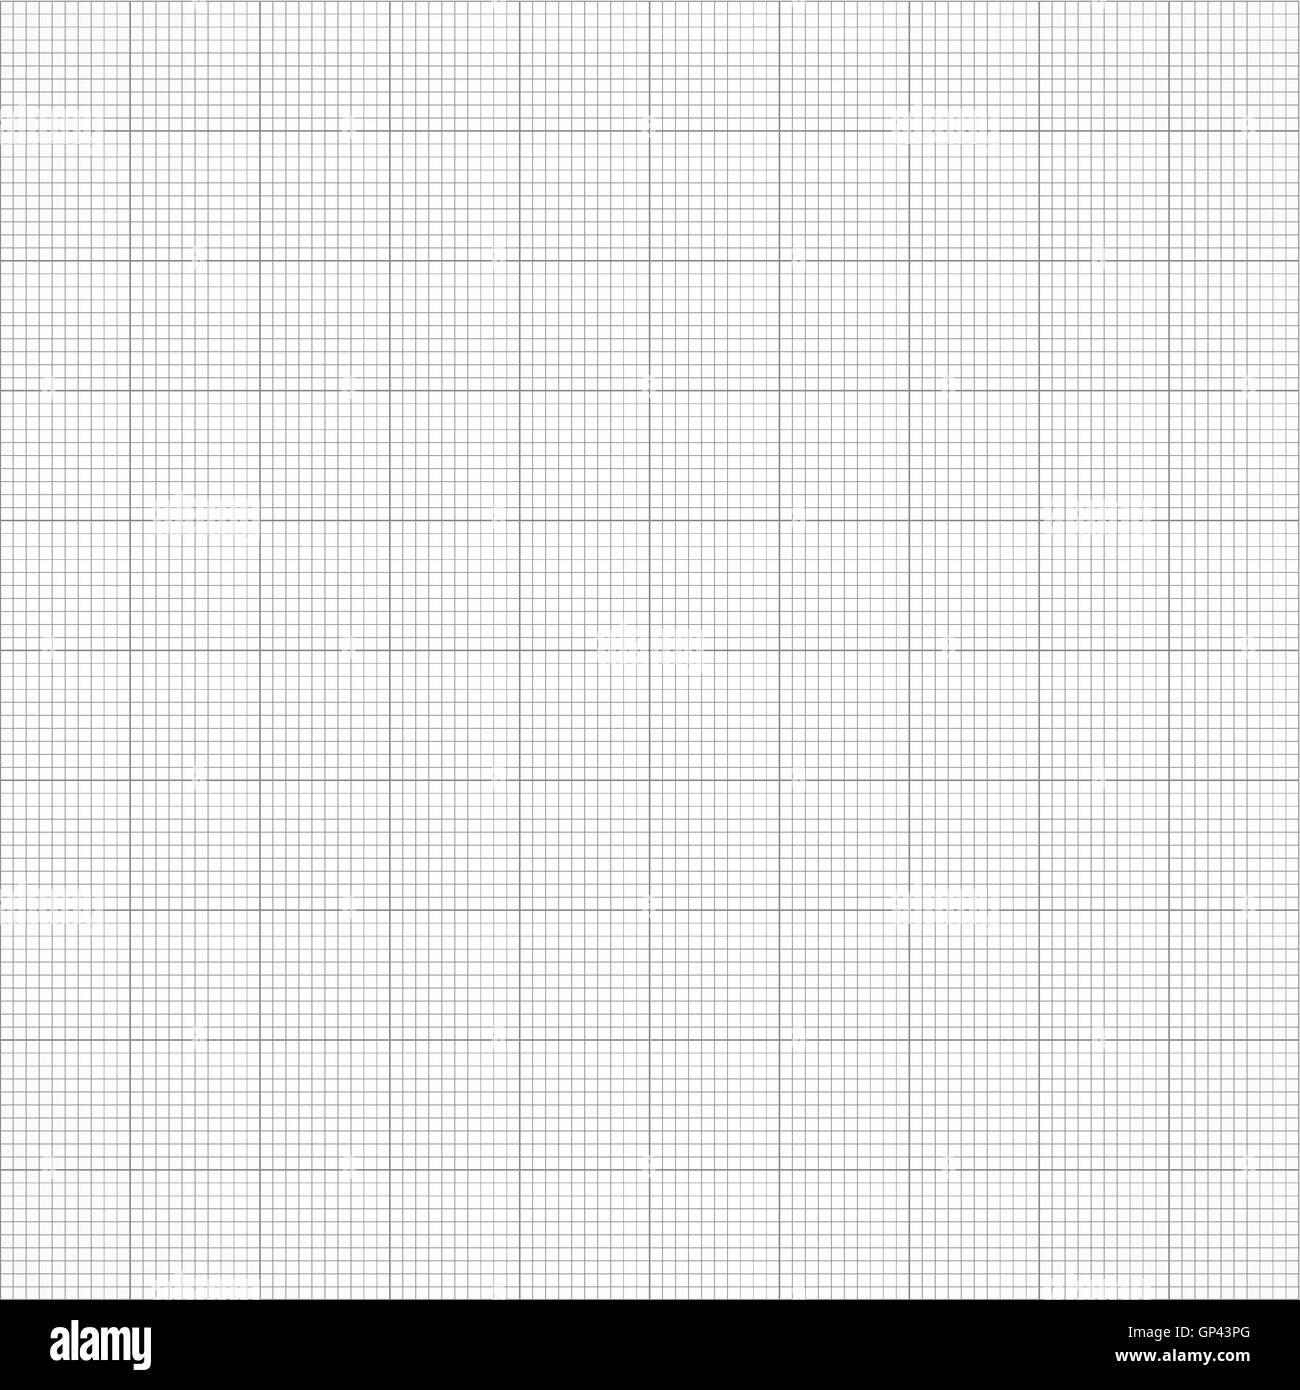 Poster seamless graph paper 